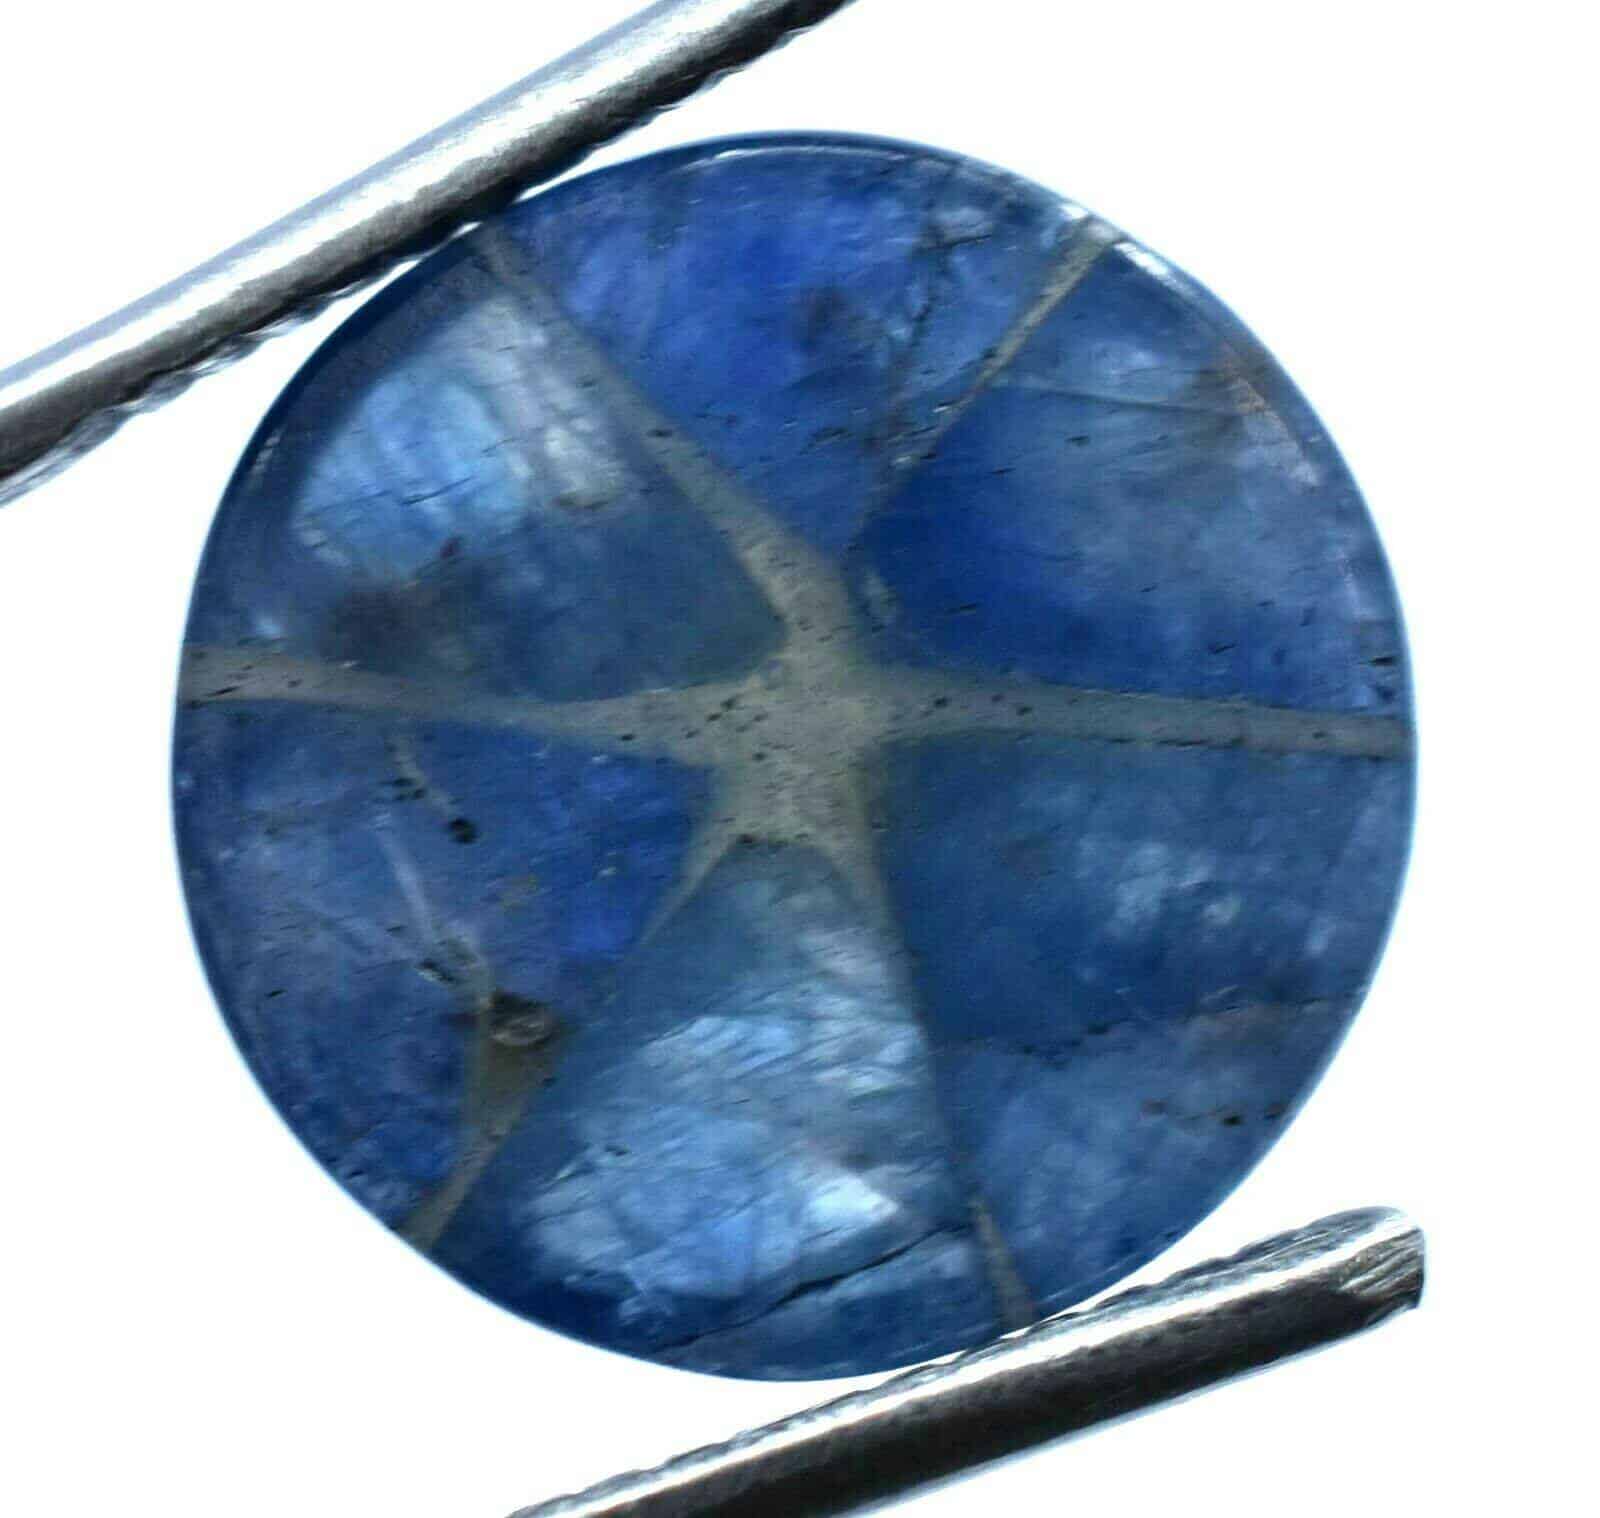 A fake Trapiche Sapphire - slightly better than some.